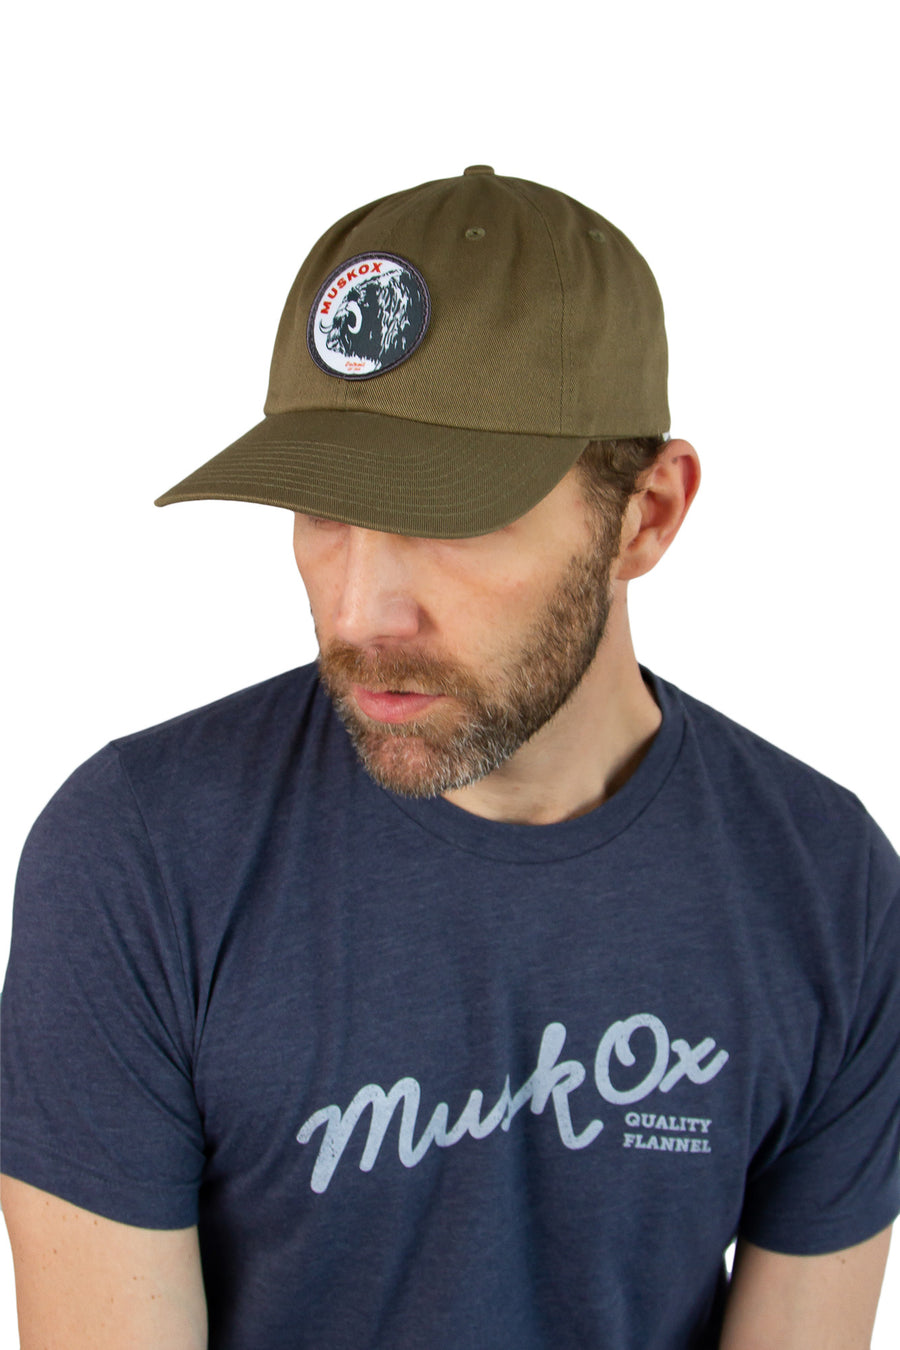 MuskOx Logo Patch Hat, Rugged Cotton Twill Hat by MuskOx Flannels